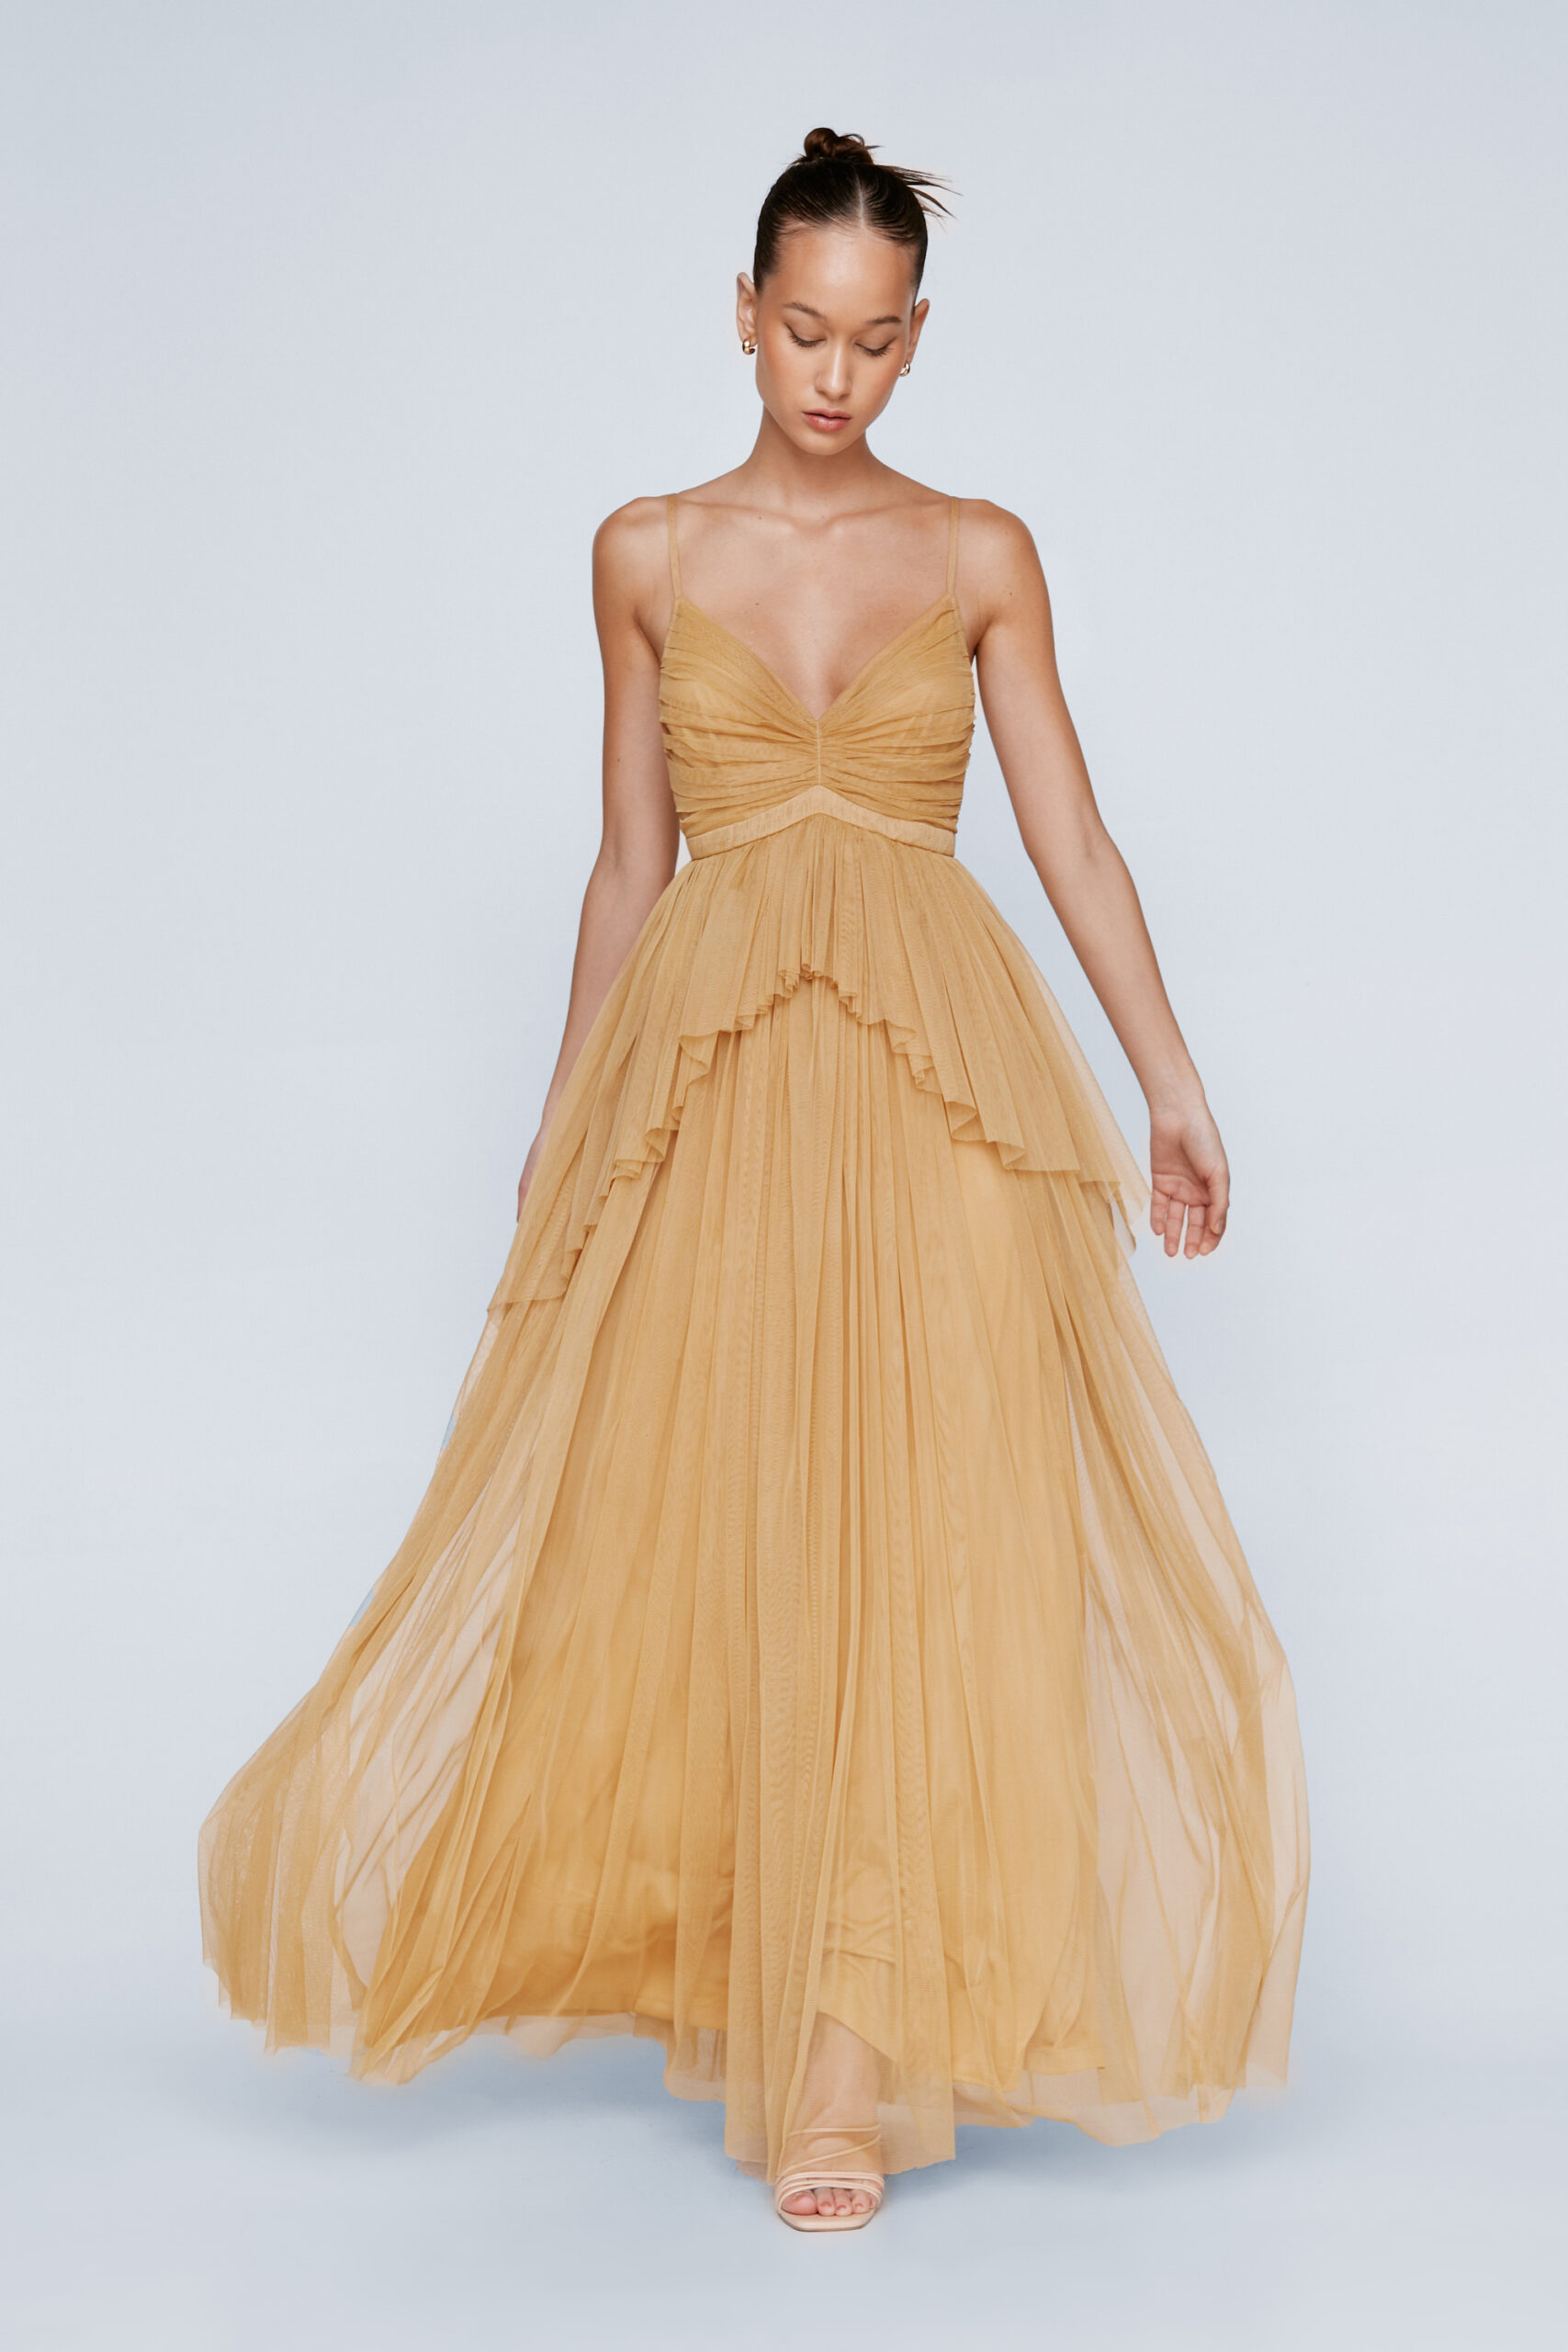 Tulle Strappy Maxi Dress